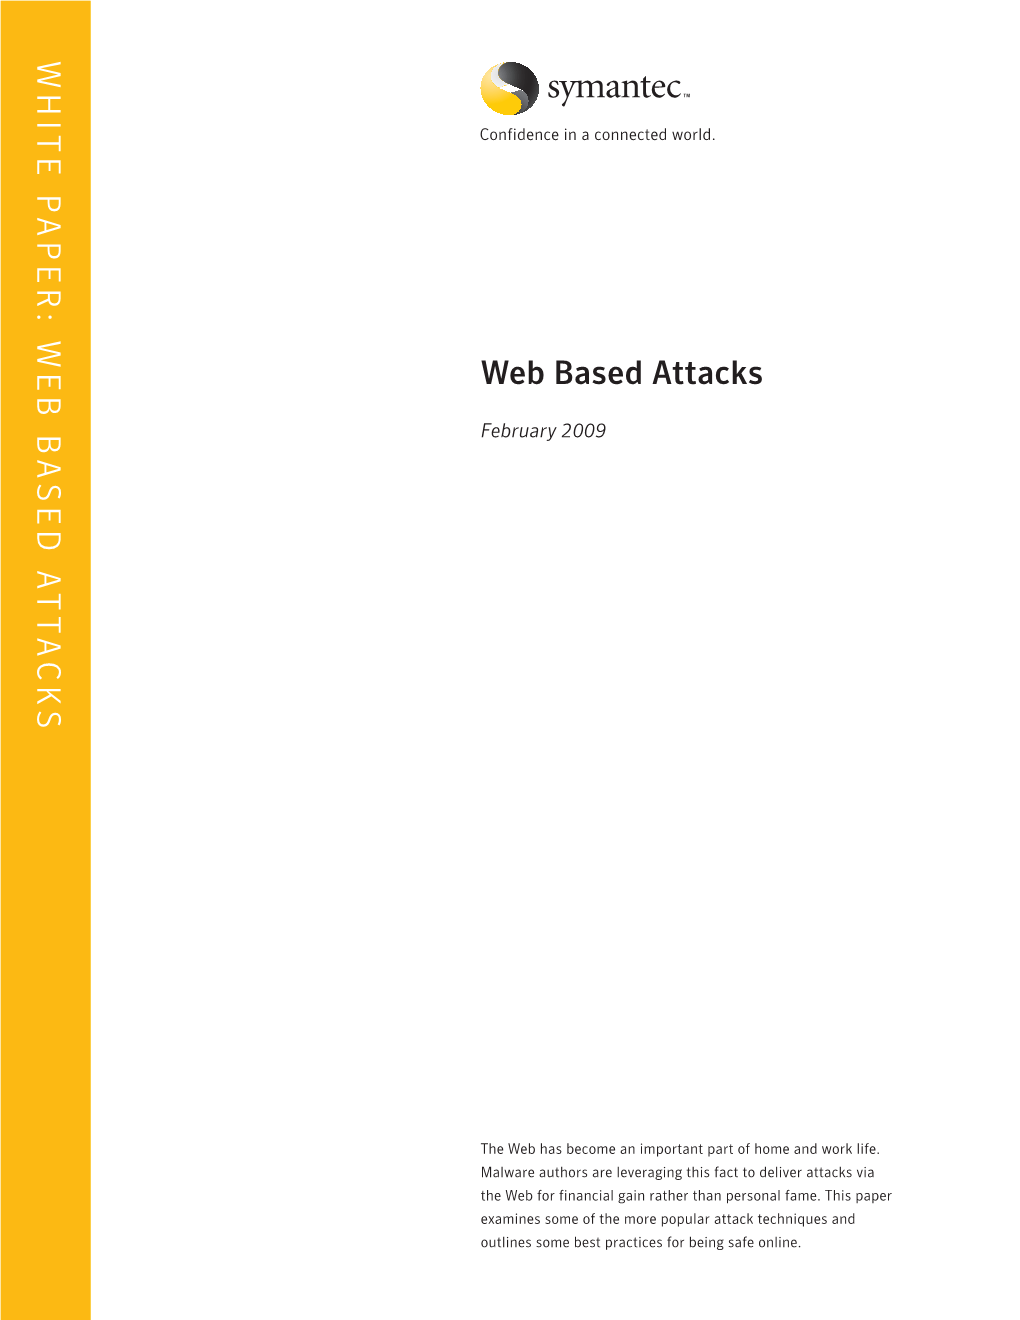 Web Based Attacks February 2009 Onfidence Confidence in a Connected World